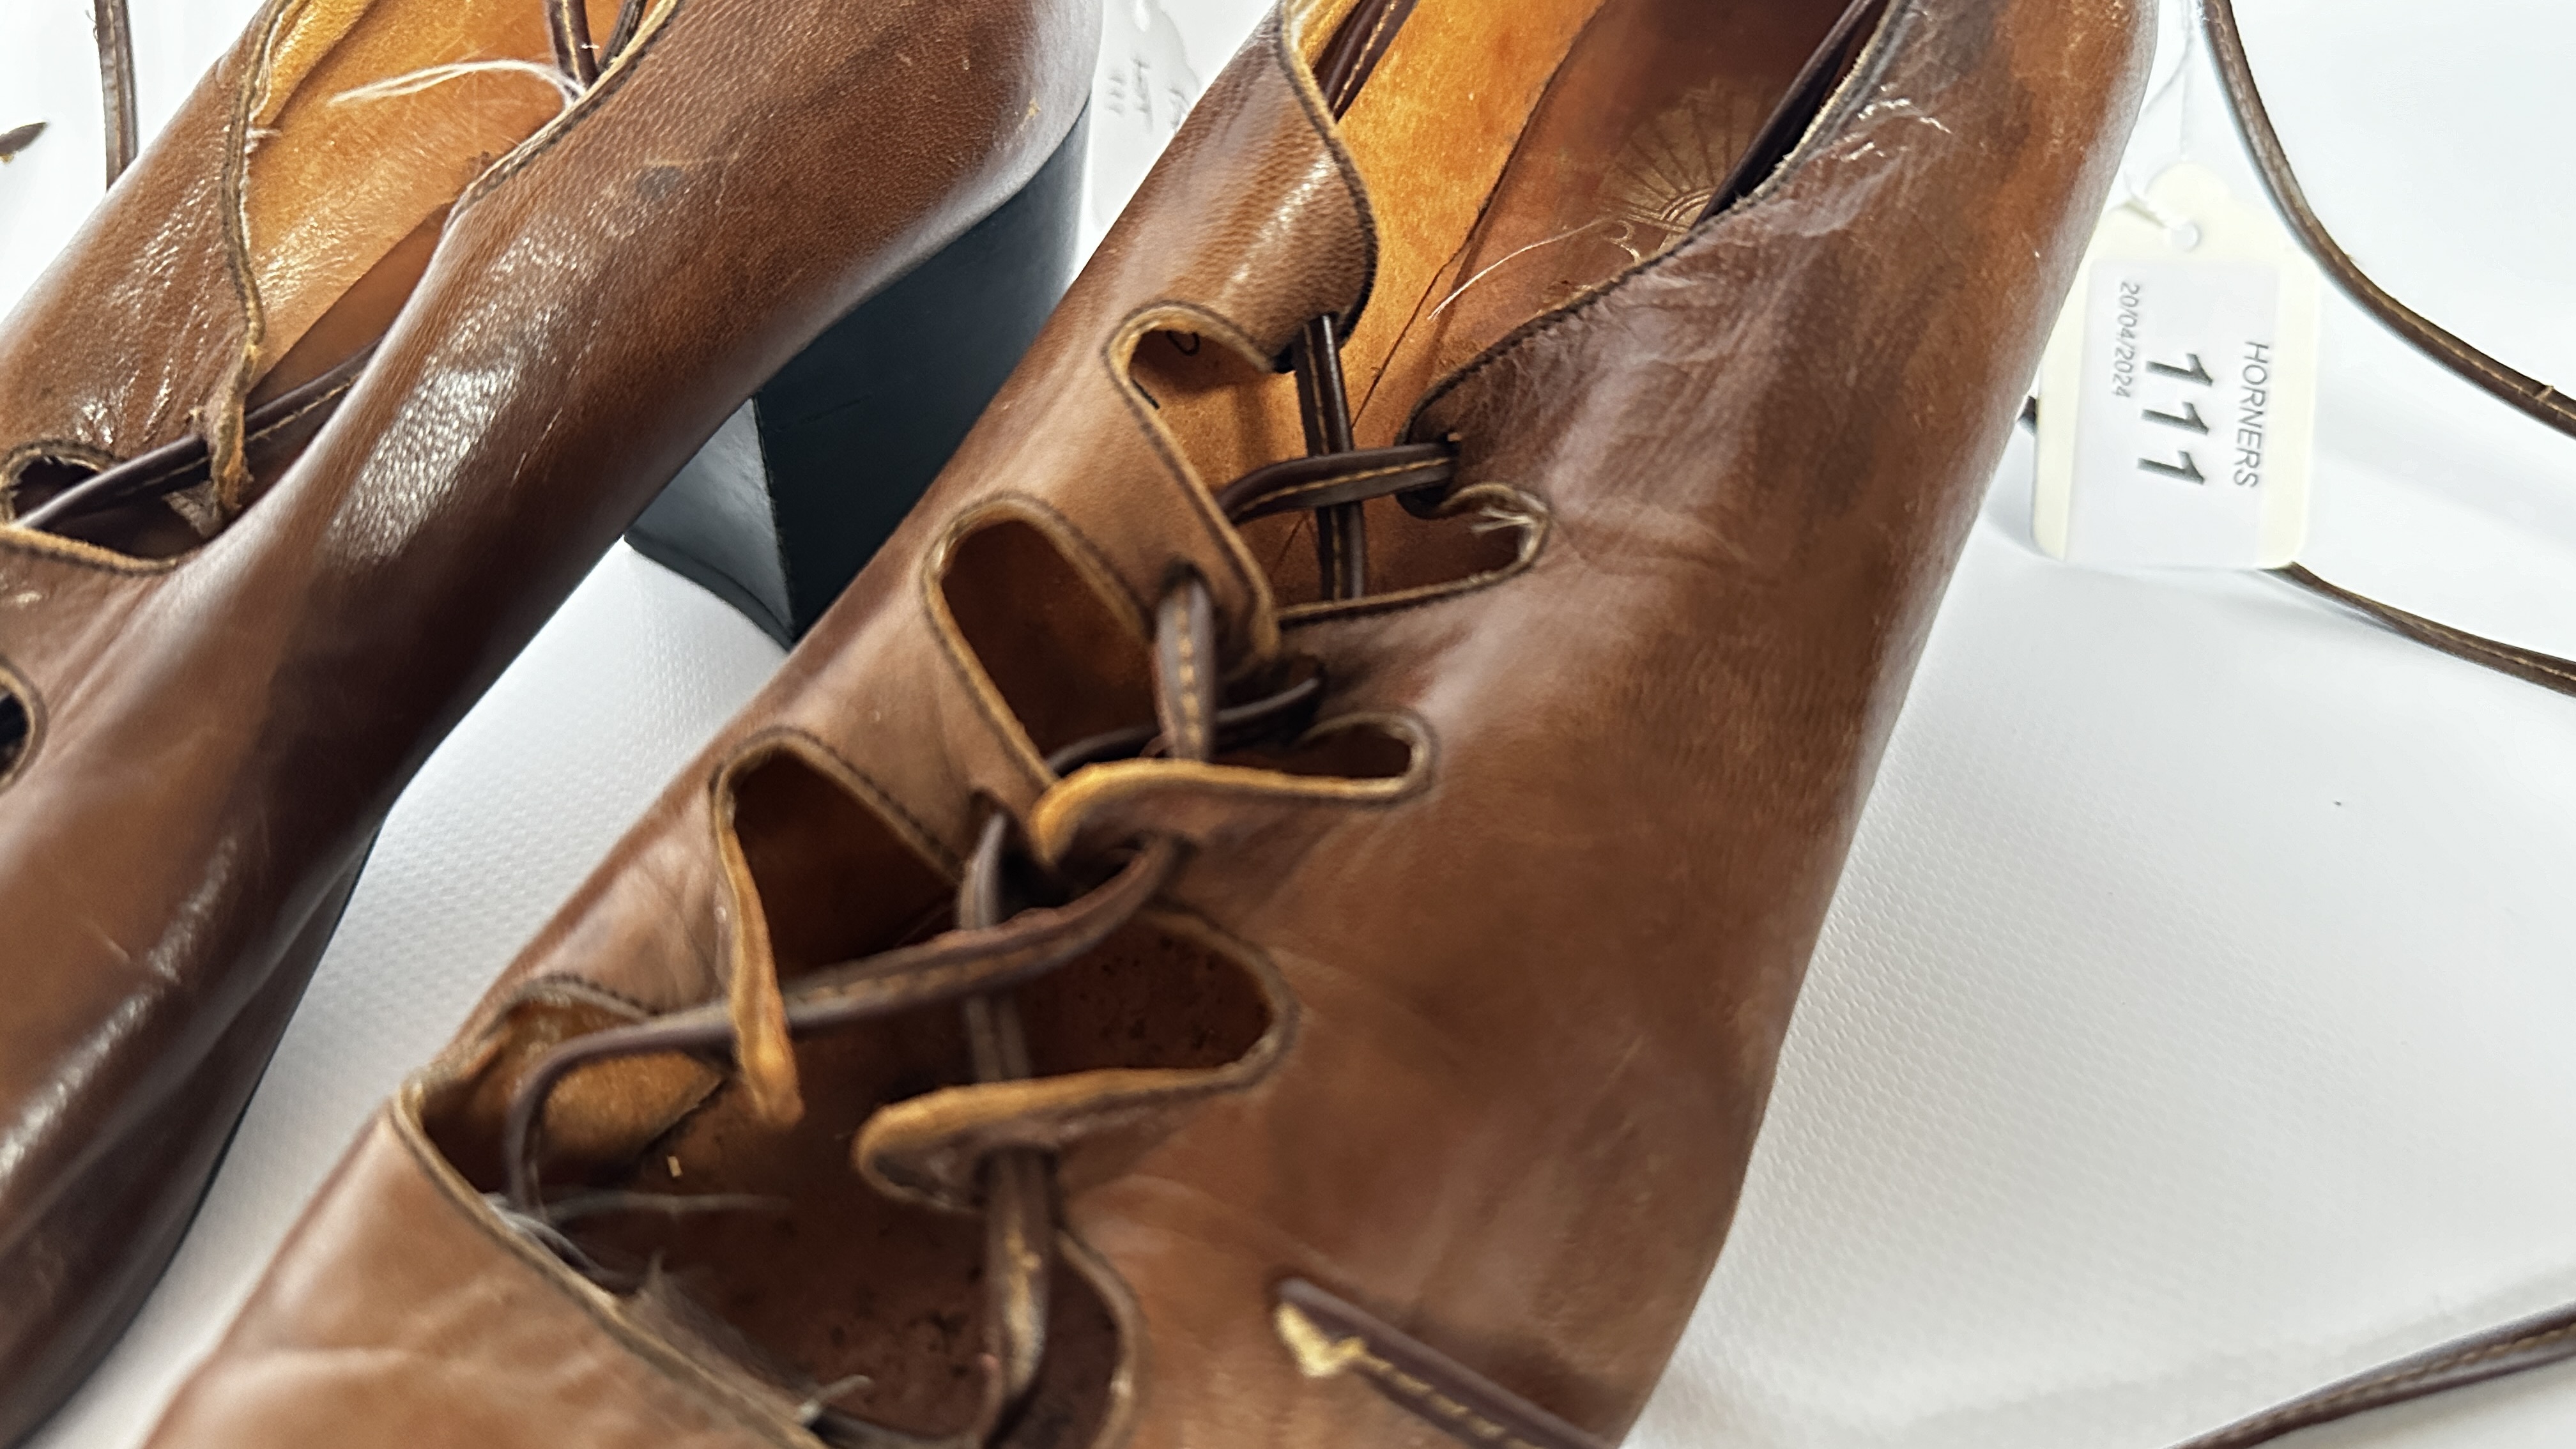 1 PAIR OF LADY'S SHOES - 'BIBA' TAN LEATHER WITH LONG LACES - A/F CONDITION, SOLD AS SEEN. - Image 4 of 14